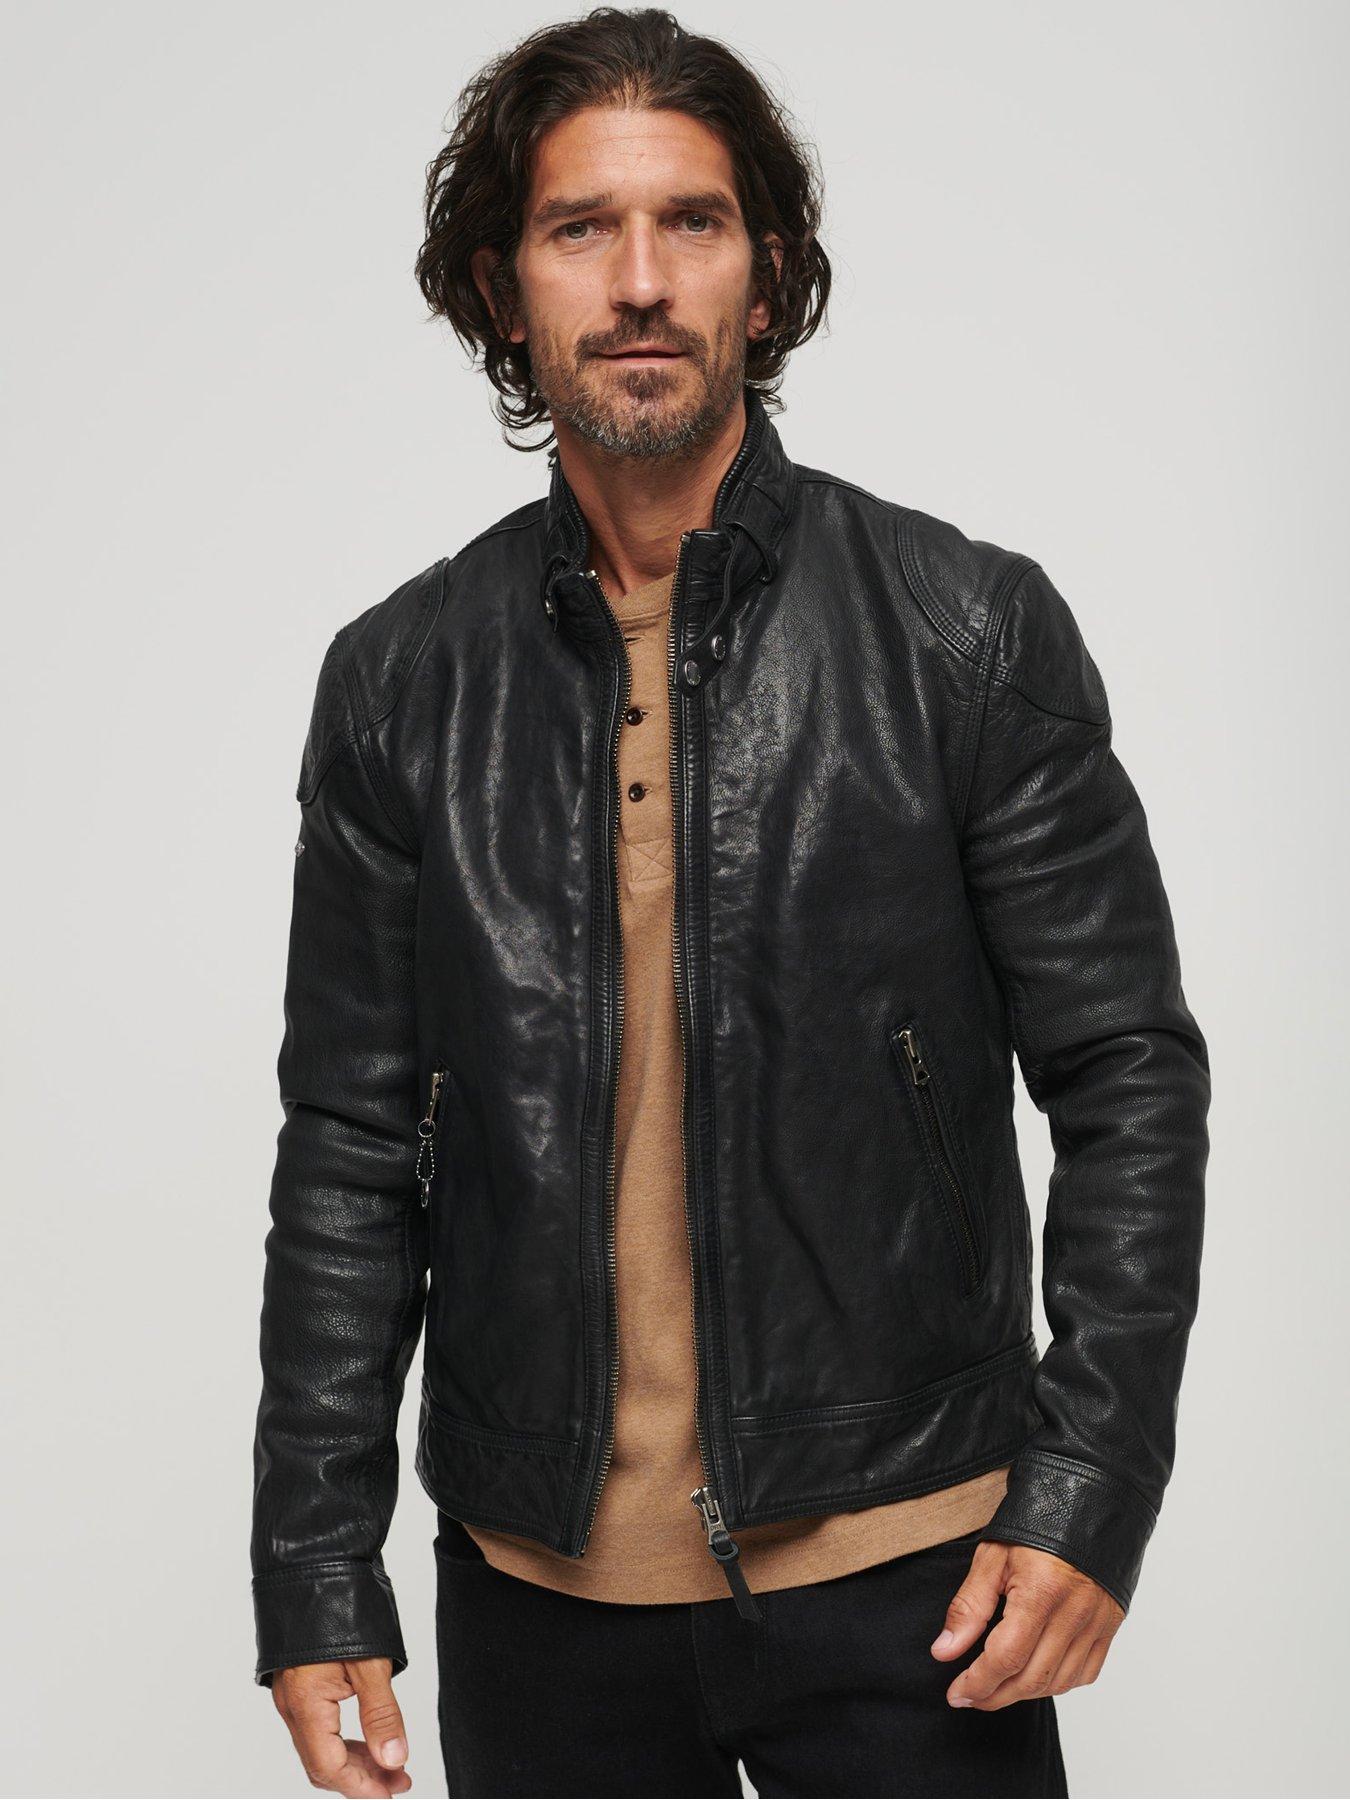 Black Skinny Jeans with Black Leather Biker Jacket Outfits For Men (154  ideas & outfits)